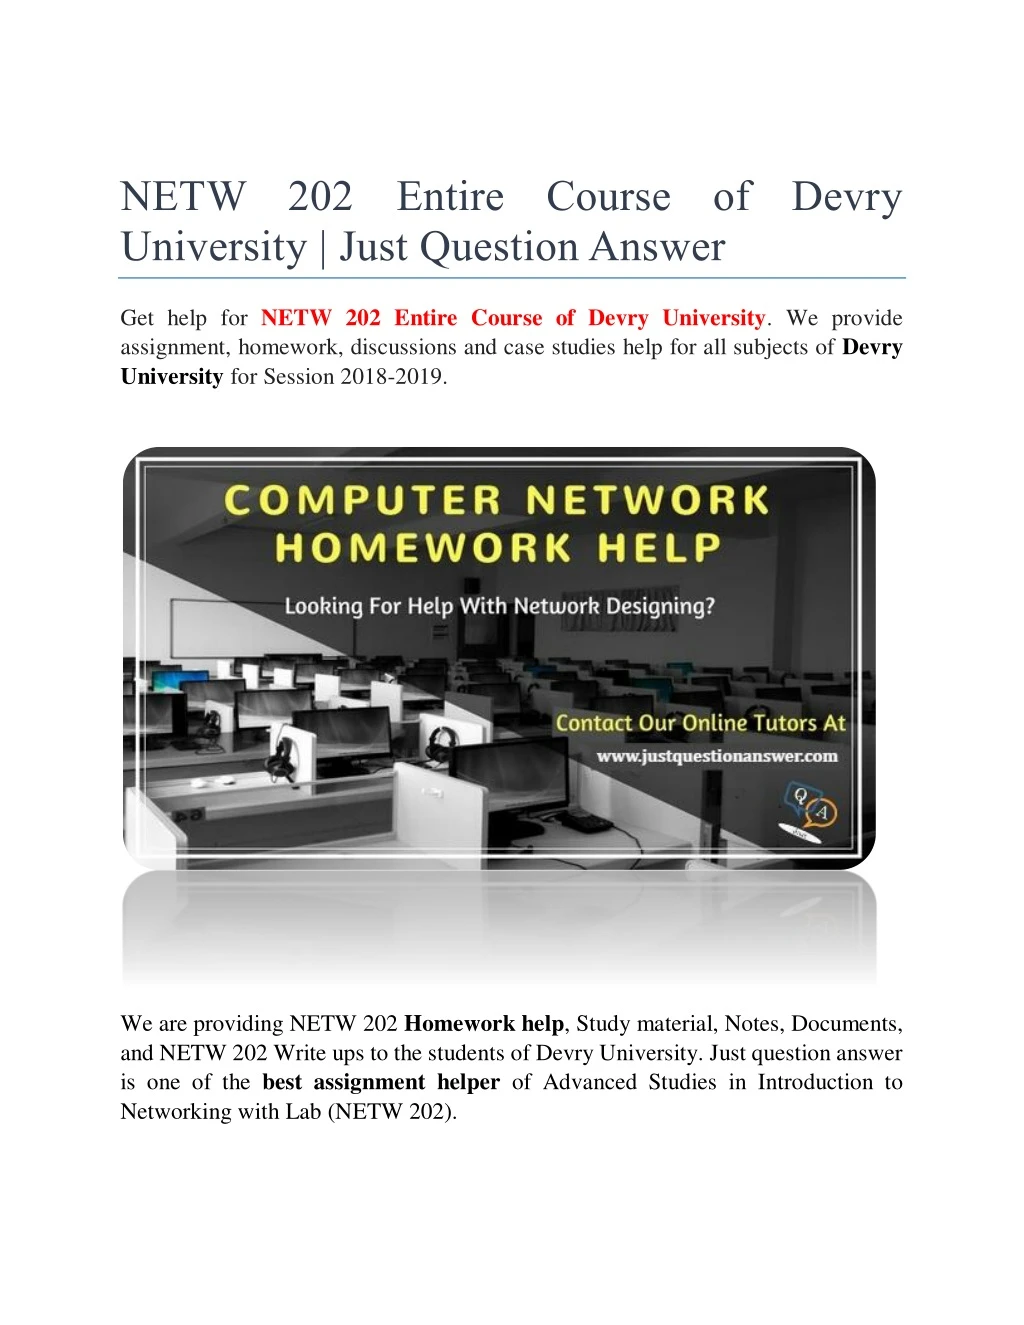 netw 202 entire course of devry university just